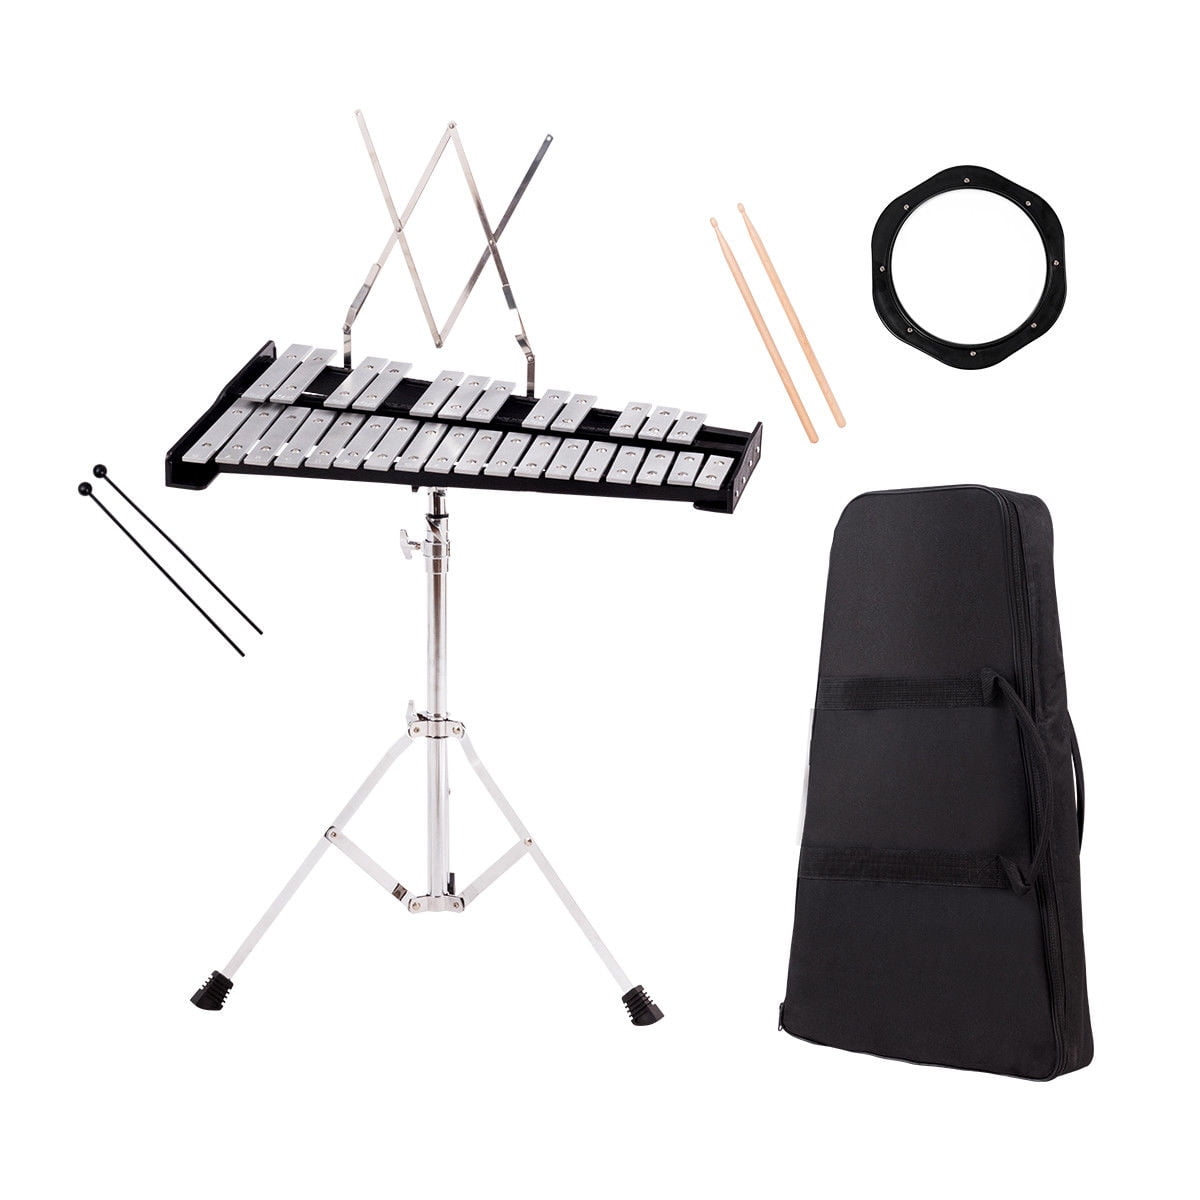  MIRIO Glockenspiel 32 Notes, Violet Xylophone Percussion Bell  Kit for Student, Adult, with 8 Drum Practice Pad, Mallets, Adjustable  Height Frame, Music Stand and Carrying Case : Musical Instruments